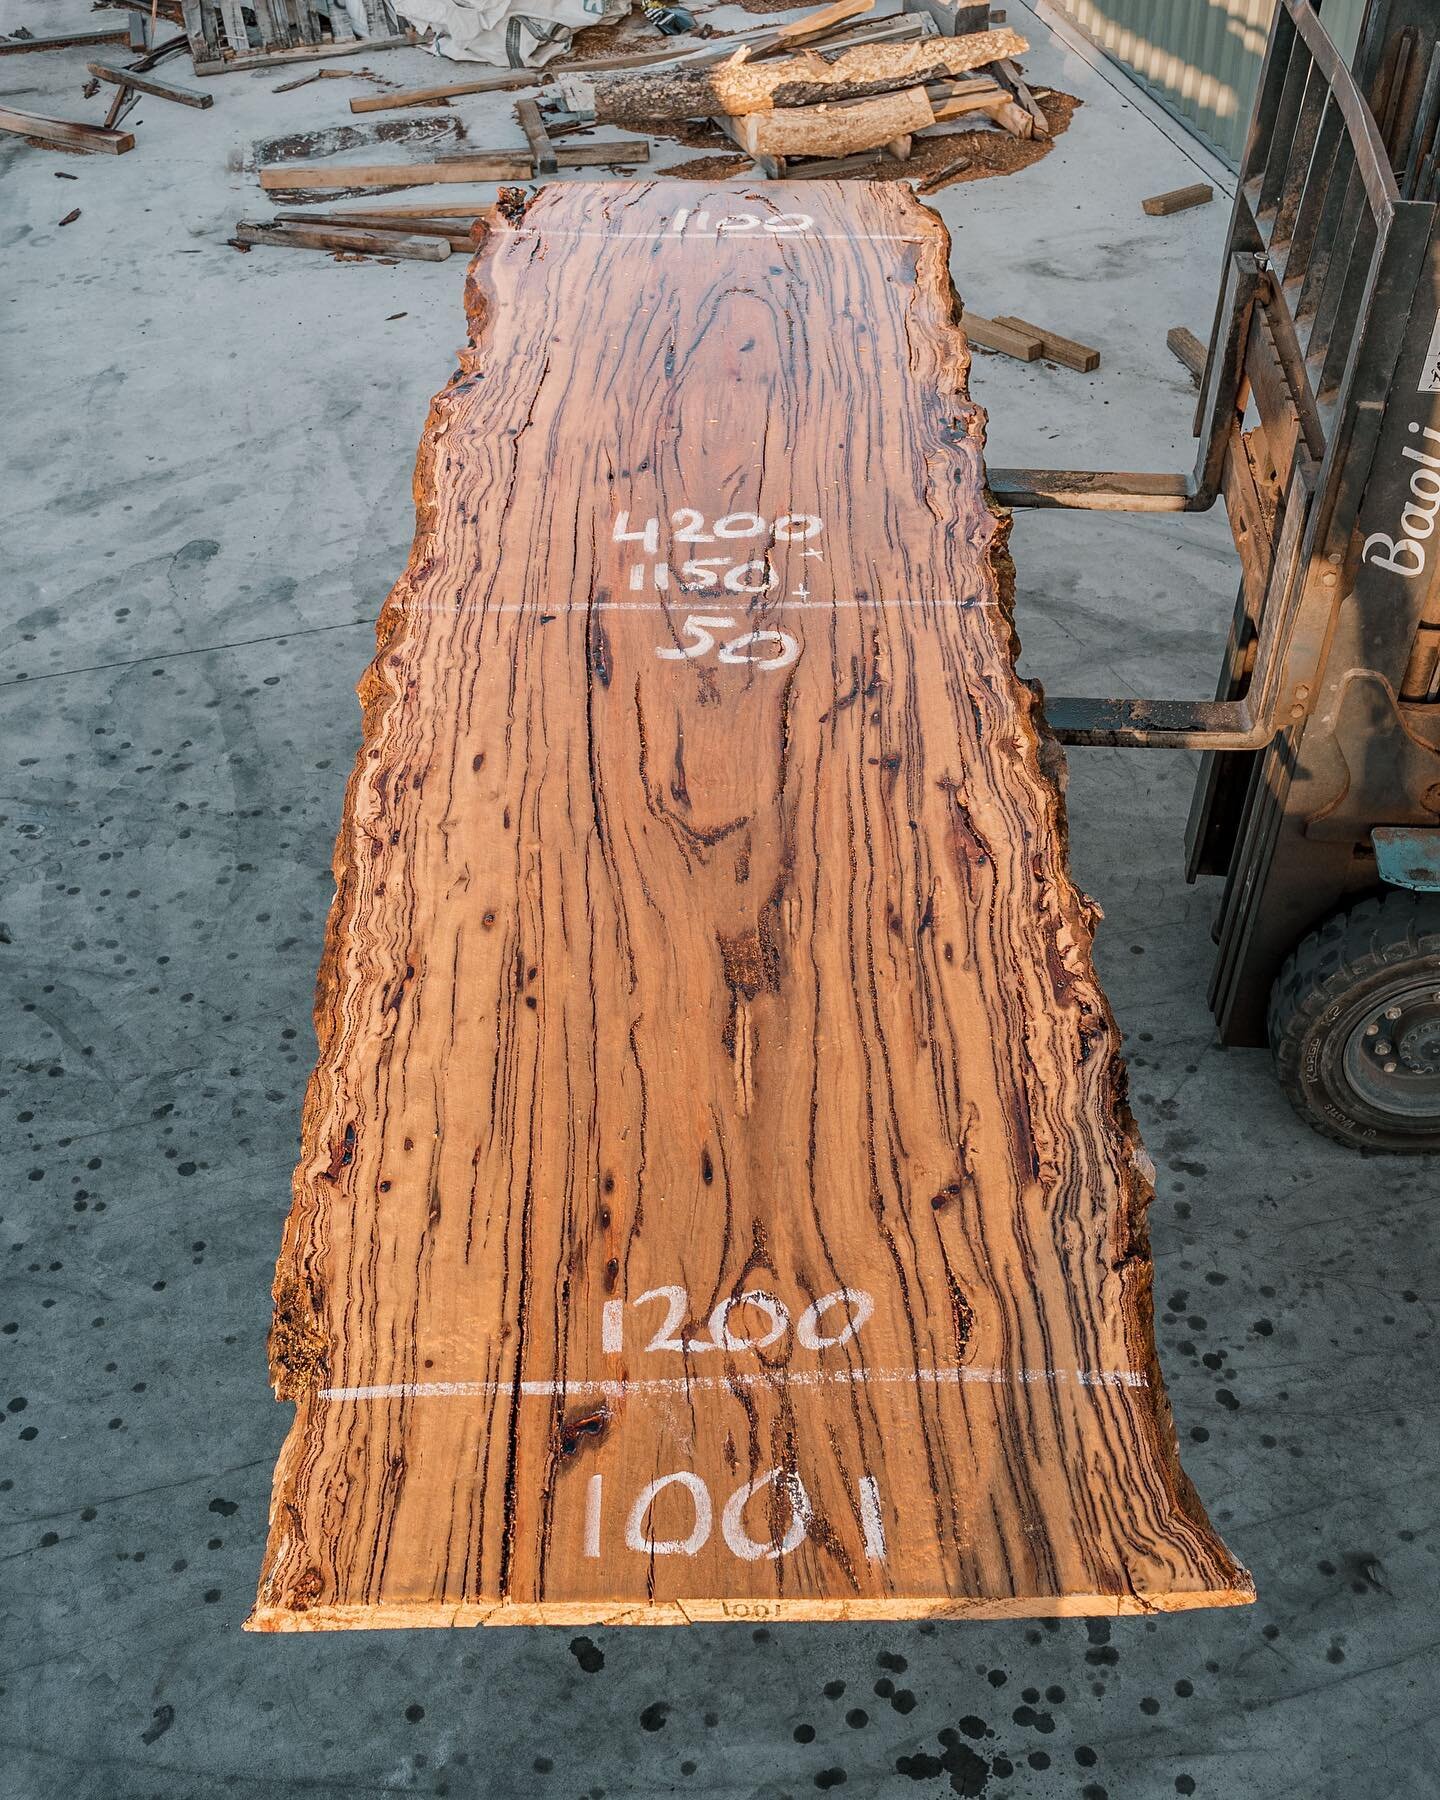 🚨 CHECK THIS OUT 🚨
This massive Marri slab is ready to be turned into a family table or a striking boardroom table. Beautiful grains, flattened, and prepped to go. Be fast! 

4200 x 1150 x 50, $3000